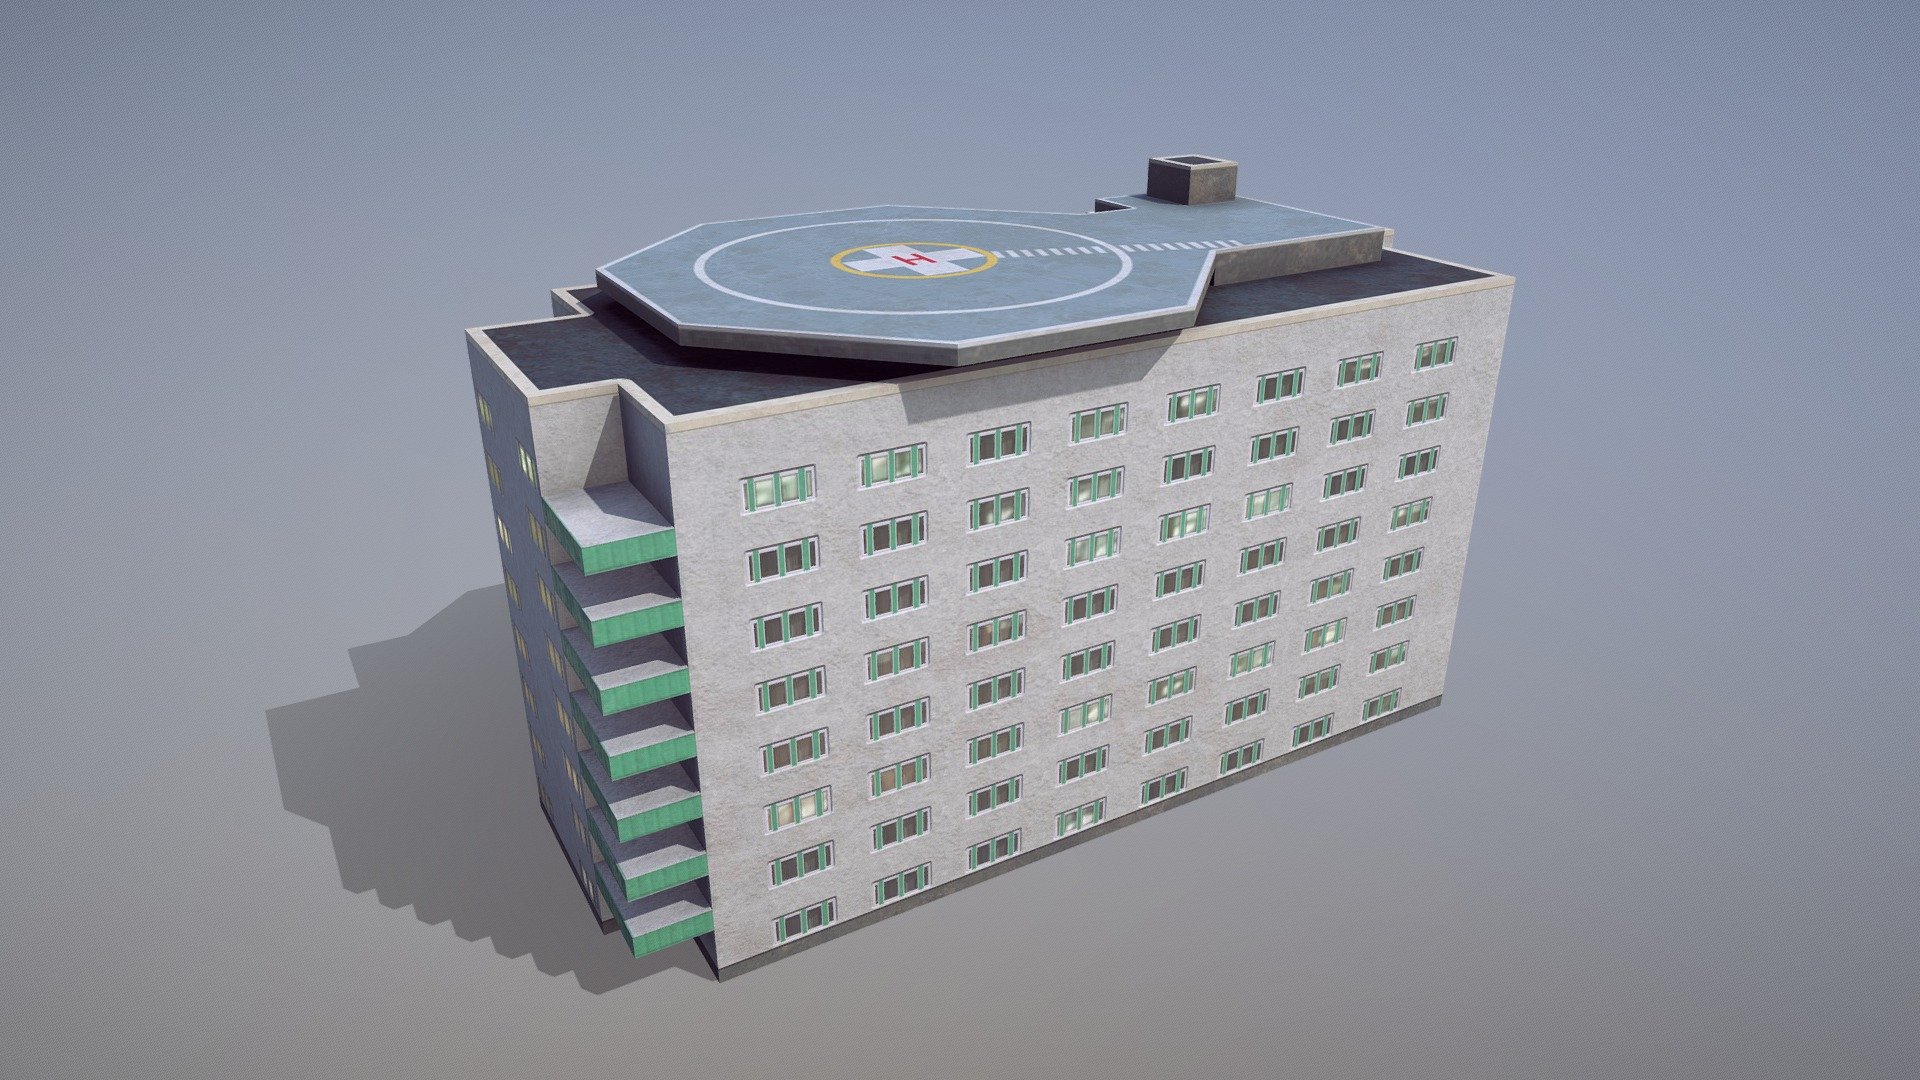 Arlanda Uppsala Hospital




LOD0 - (triangles 262) / (pssoints 167)

LOD1 - (triangles 142) / (points 124)

LOD2 - (triangles 46) / (points 35)

Low-poly 3D model Building with LODs




Textures for PBR shader (Albedo, AmbietOcclusion, Gloss, Specular, NormalMap, Emission) they may be used with Unity3D, Unreal Engine. 

All pictures (previews) REALTIME rendering

Textures for NIGHT

Textures for SUMMER and WINTER


Сontains 3 LODs




Textures:




Arlanda_Uppsala_Hospital_Albedo.png           - 2048x2048

Arlanda_Uppsala_Hospital_AmbietOcclusion.png      - 2048x2048

Arlanda_Uppsala_Hospital_Gloss.png            - 2048x2048

Arlanda_Uppsala_Hospital_Specular.png         - 2048x2048

Arlanda_Uppsala_Hospital_NormalMap.png        - 2048x2048 


Arlanda_Uppsala_Hospital_Emission.png         - 2048x2048




Pack for WINTER   





If you have questions about my models or need any kind of help, feel free to contact me and i'll do my best to help you 3d model